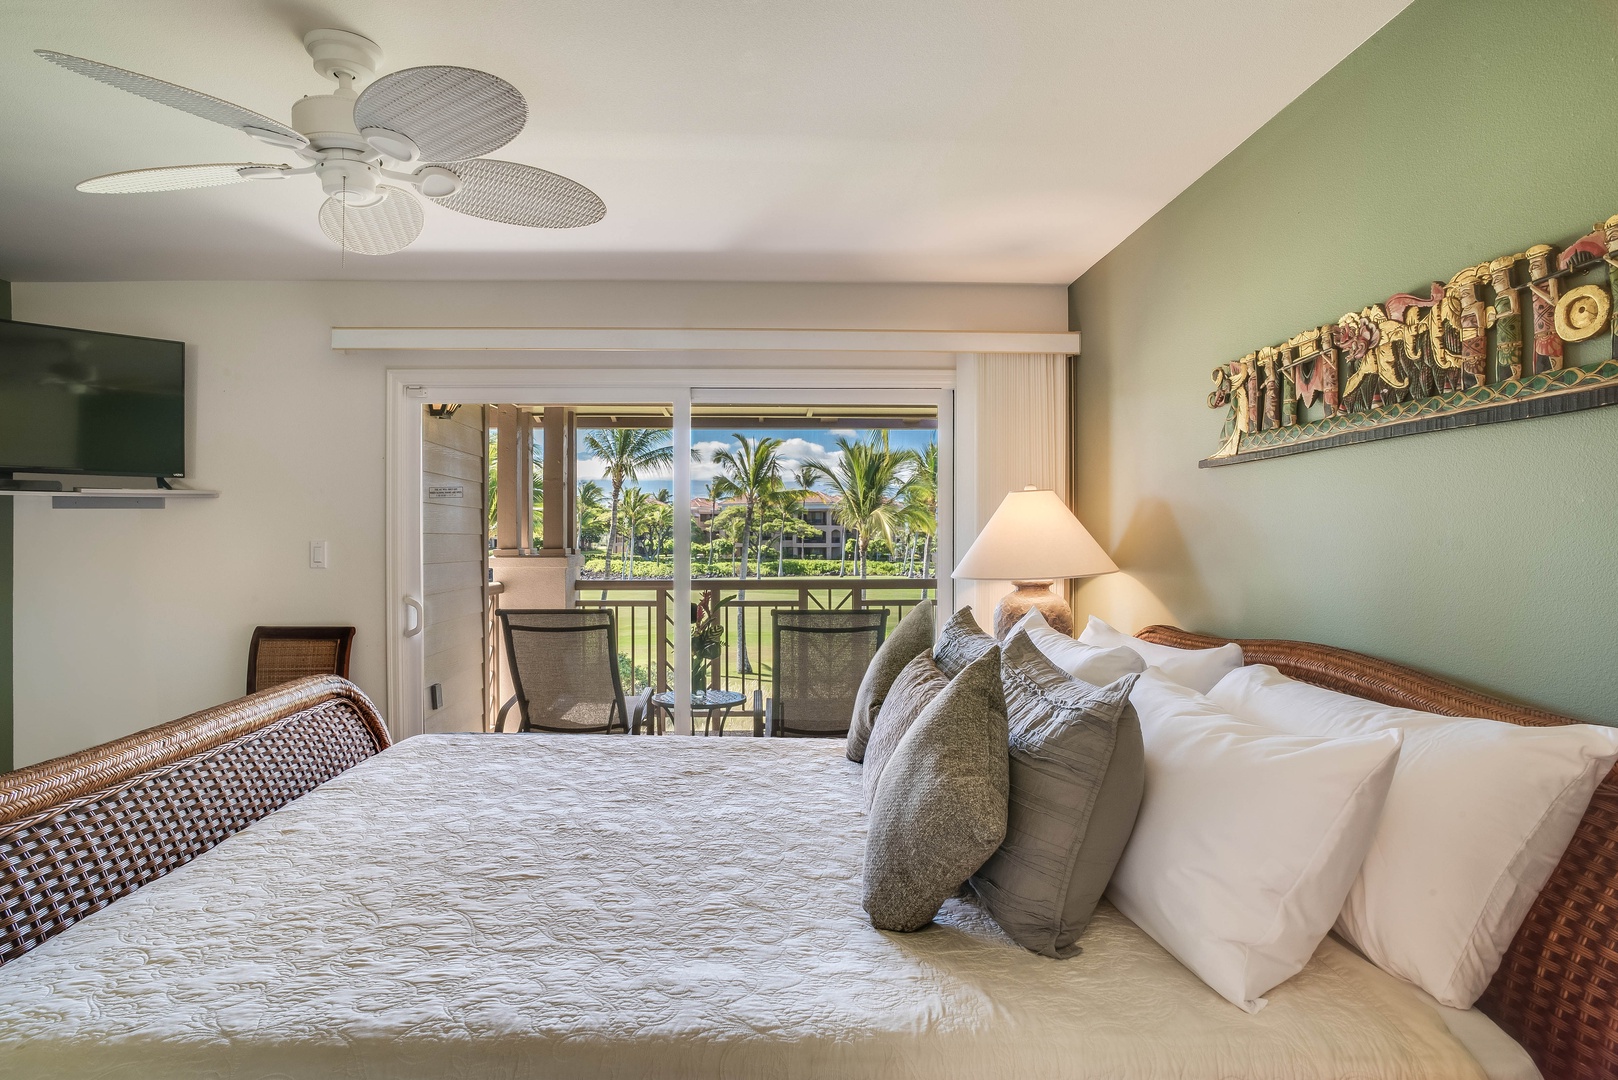 Waikoloa Vacation Rentals, Waikoloa Colony Villas 403 - Primary Bedroom w/ King Size Bed, Private Lanai w/ Loungers ,and Ensuite Bath